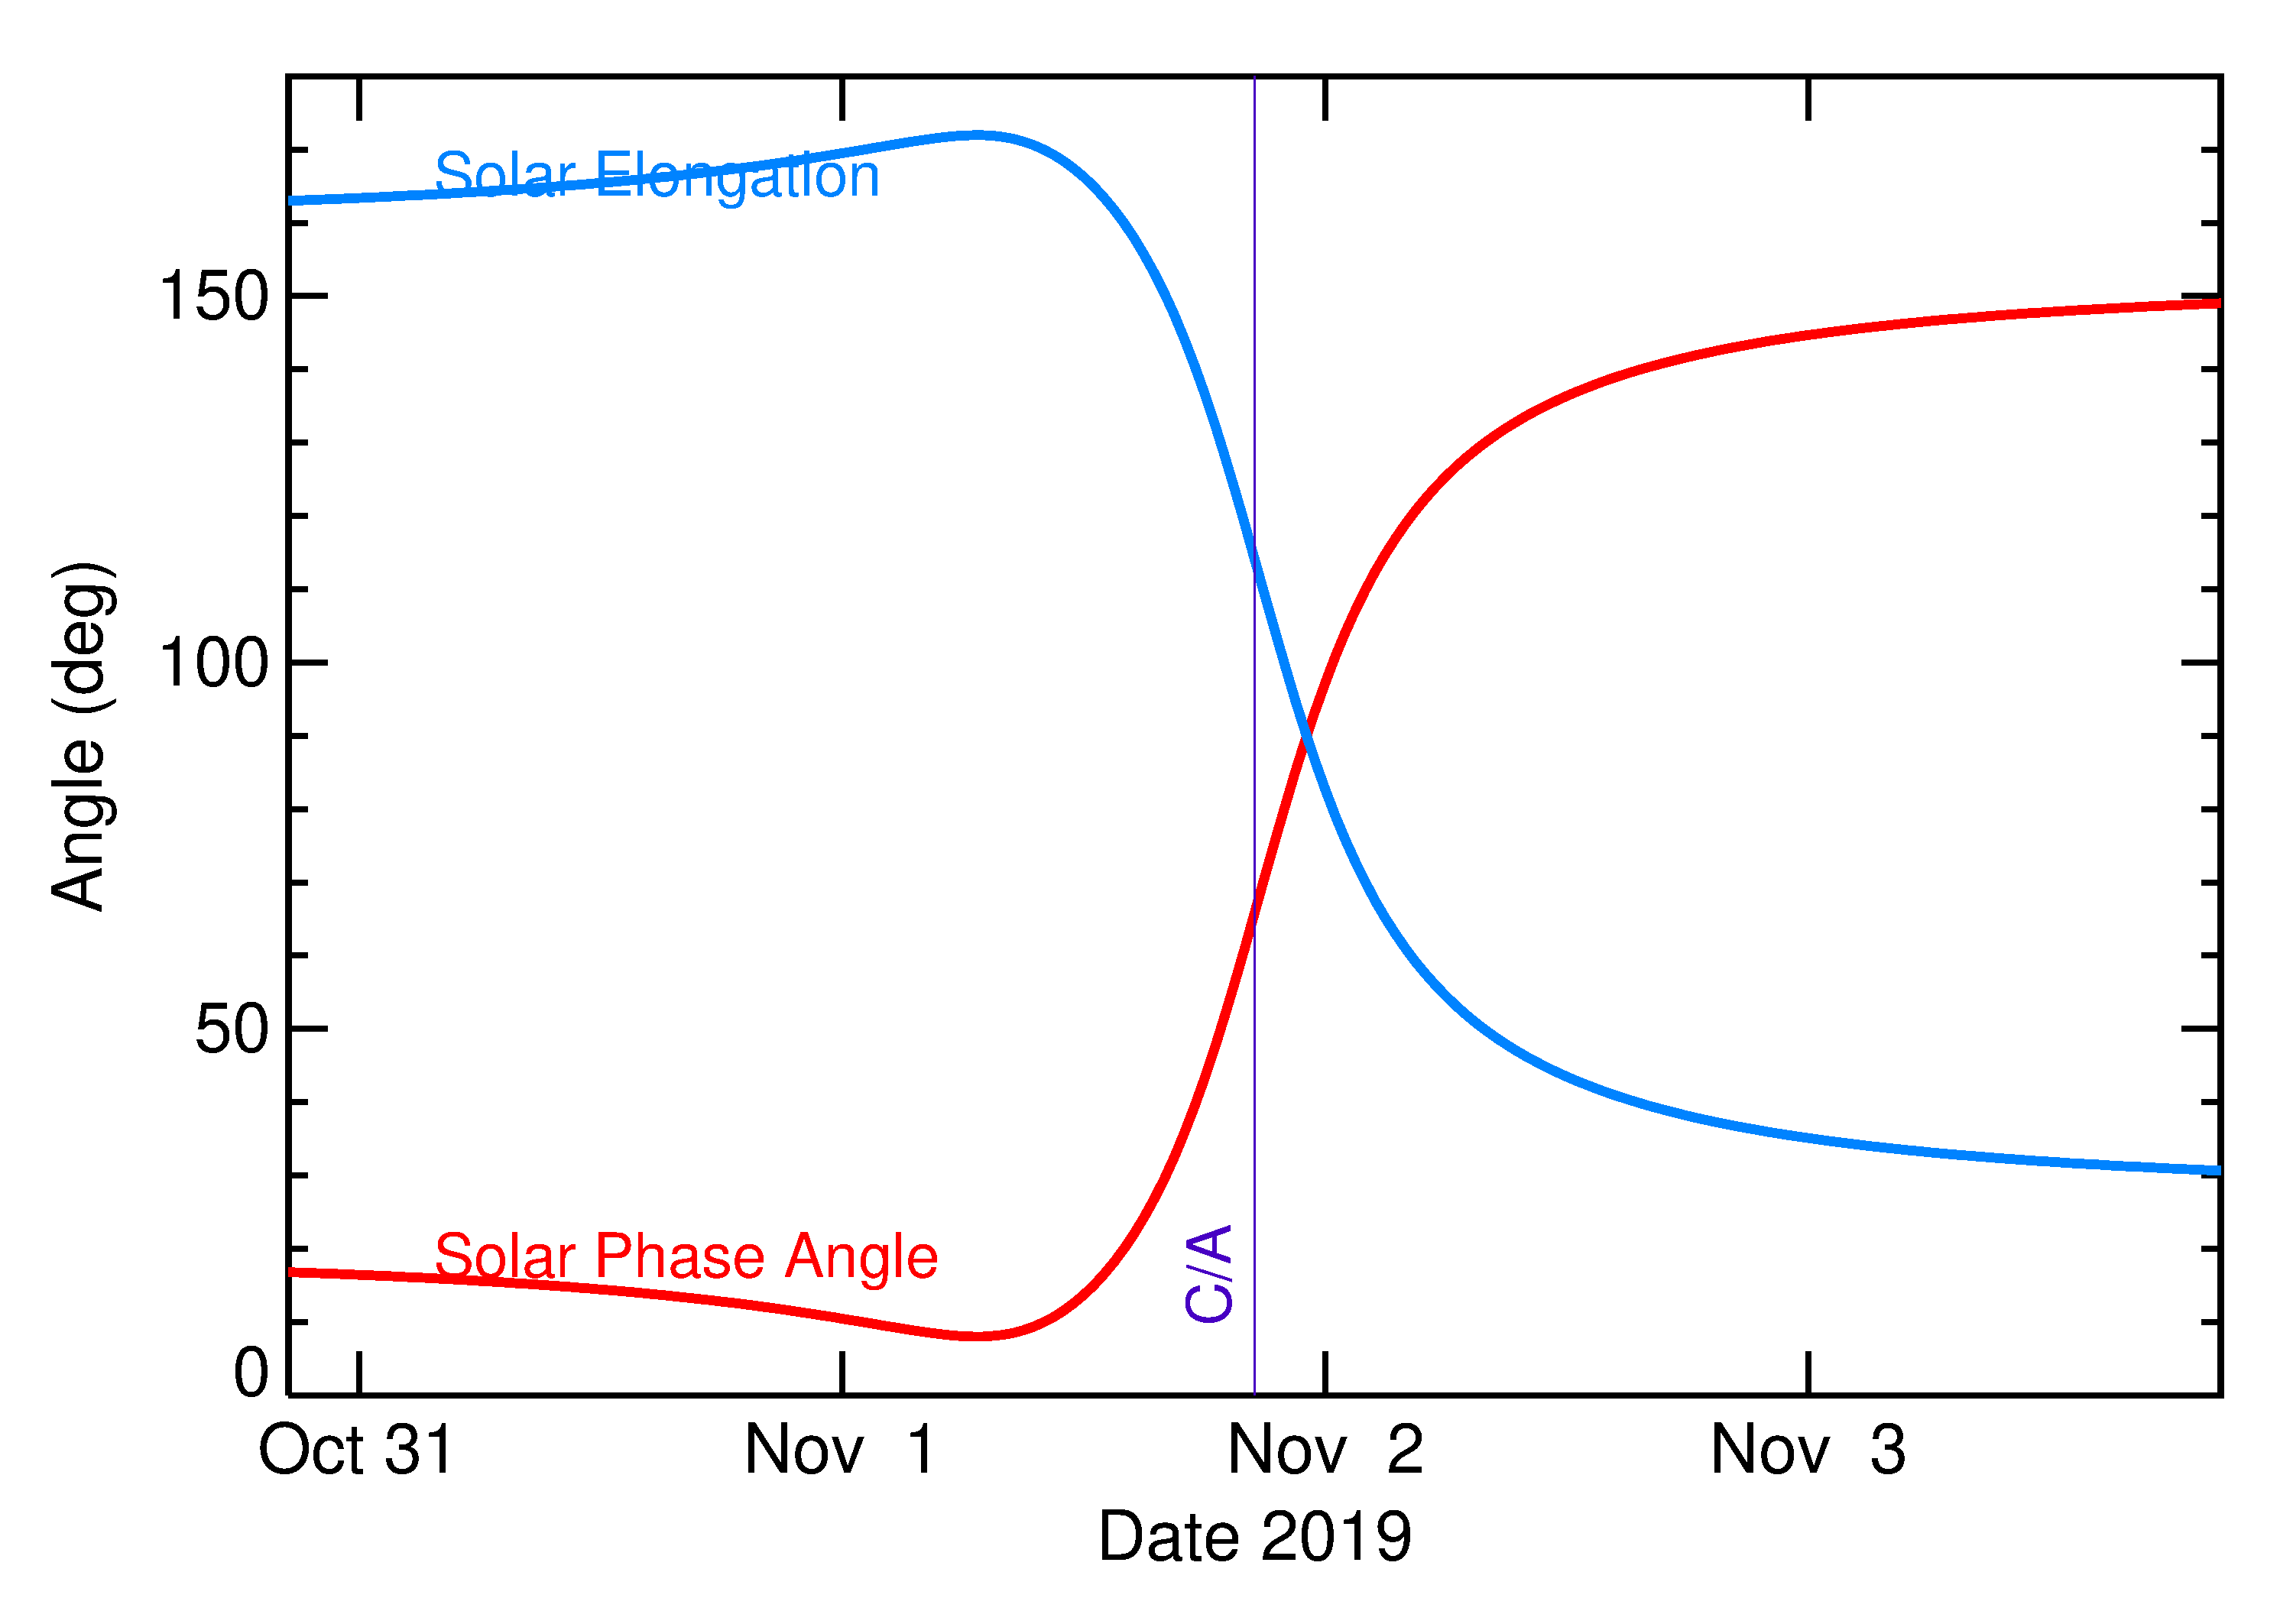 Solar Elongation and Solar Phase Angle of 2019 UG11 in the days around closest approach